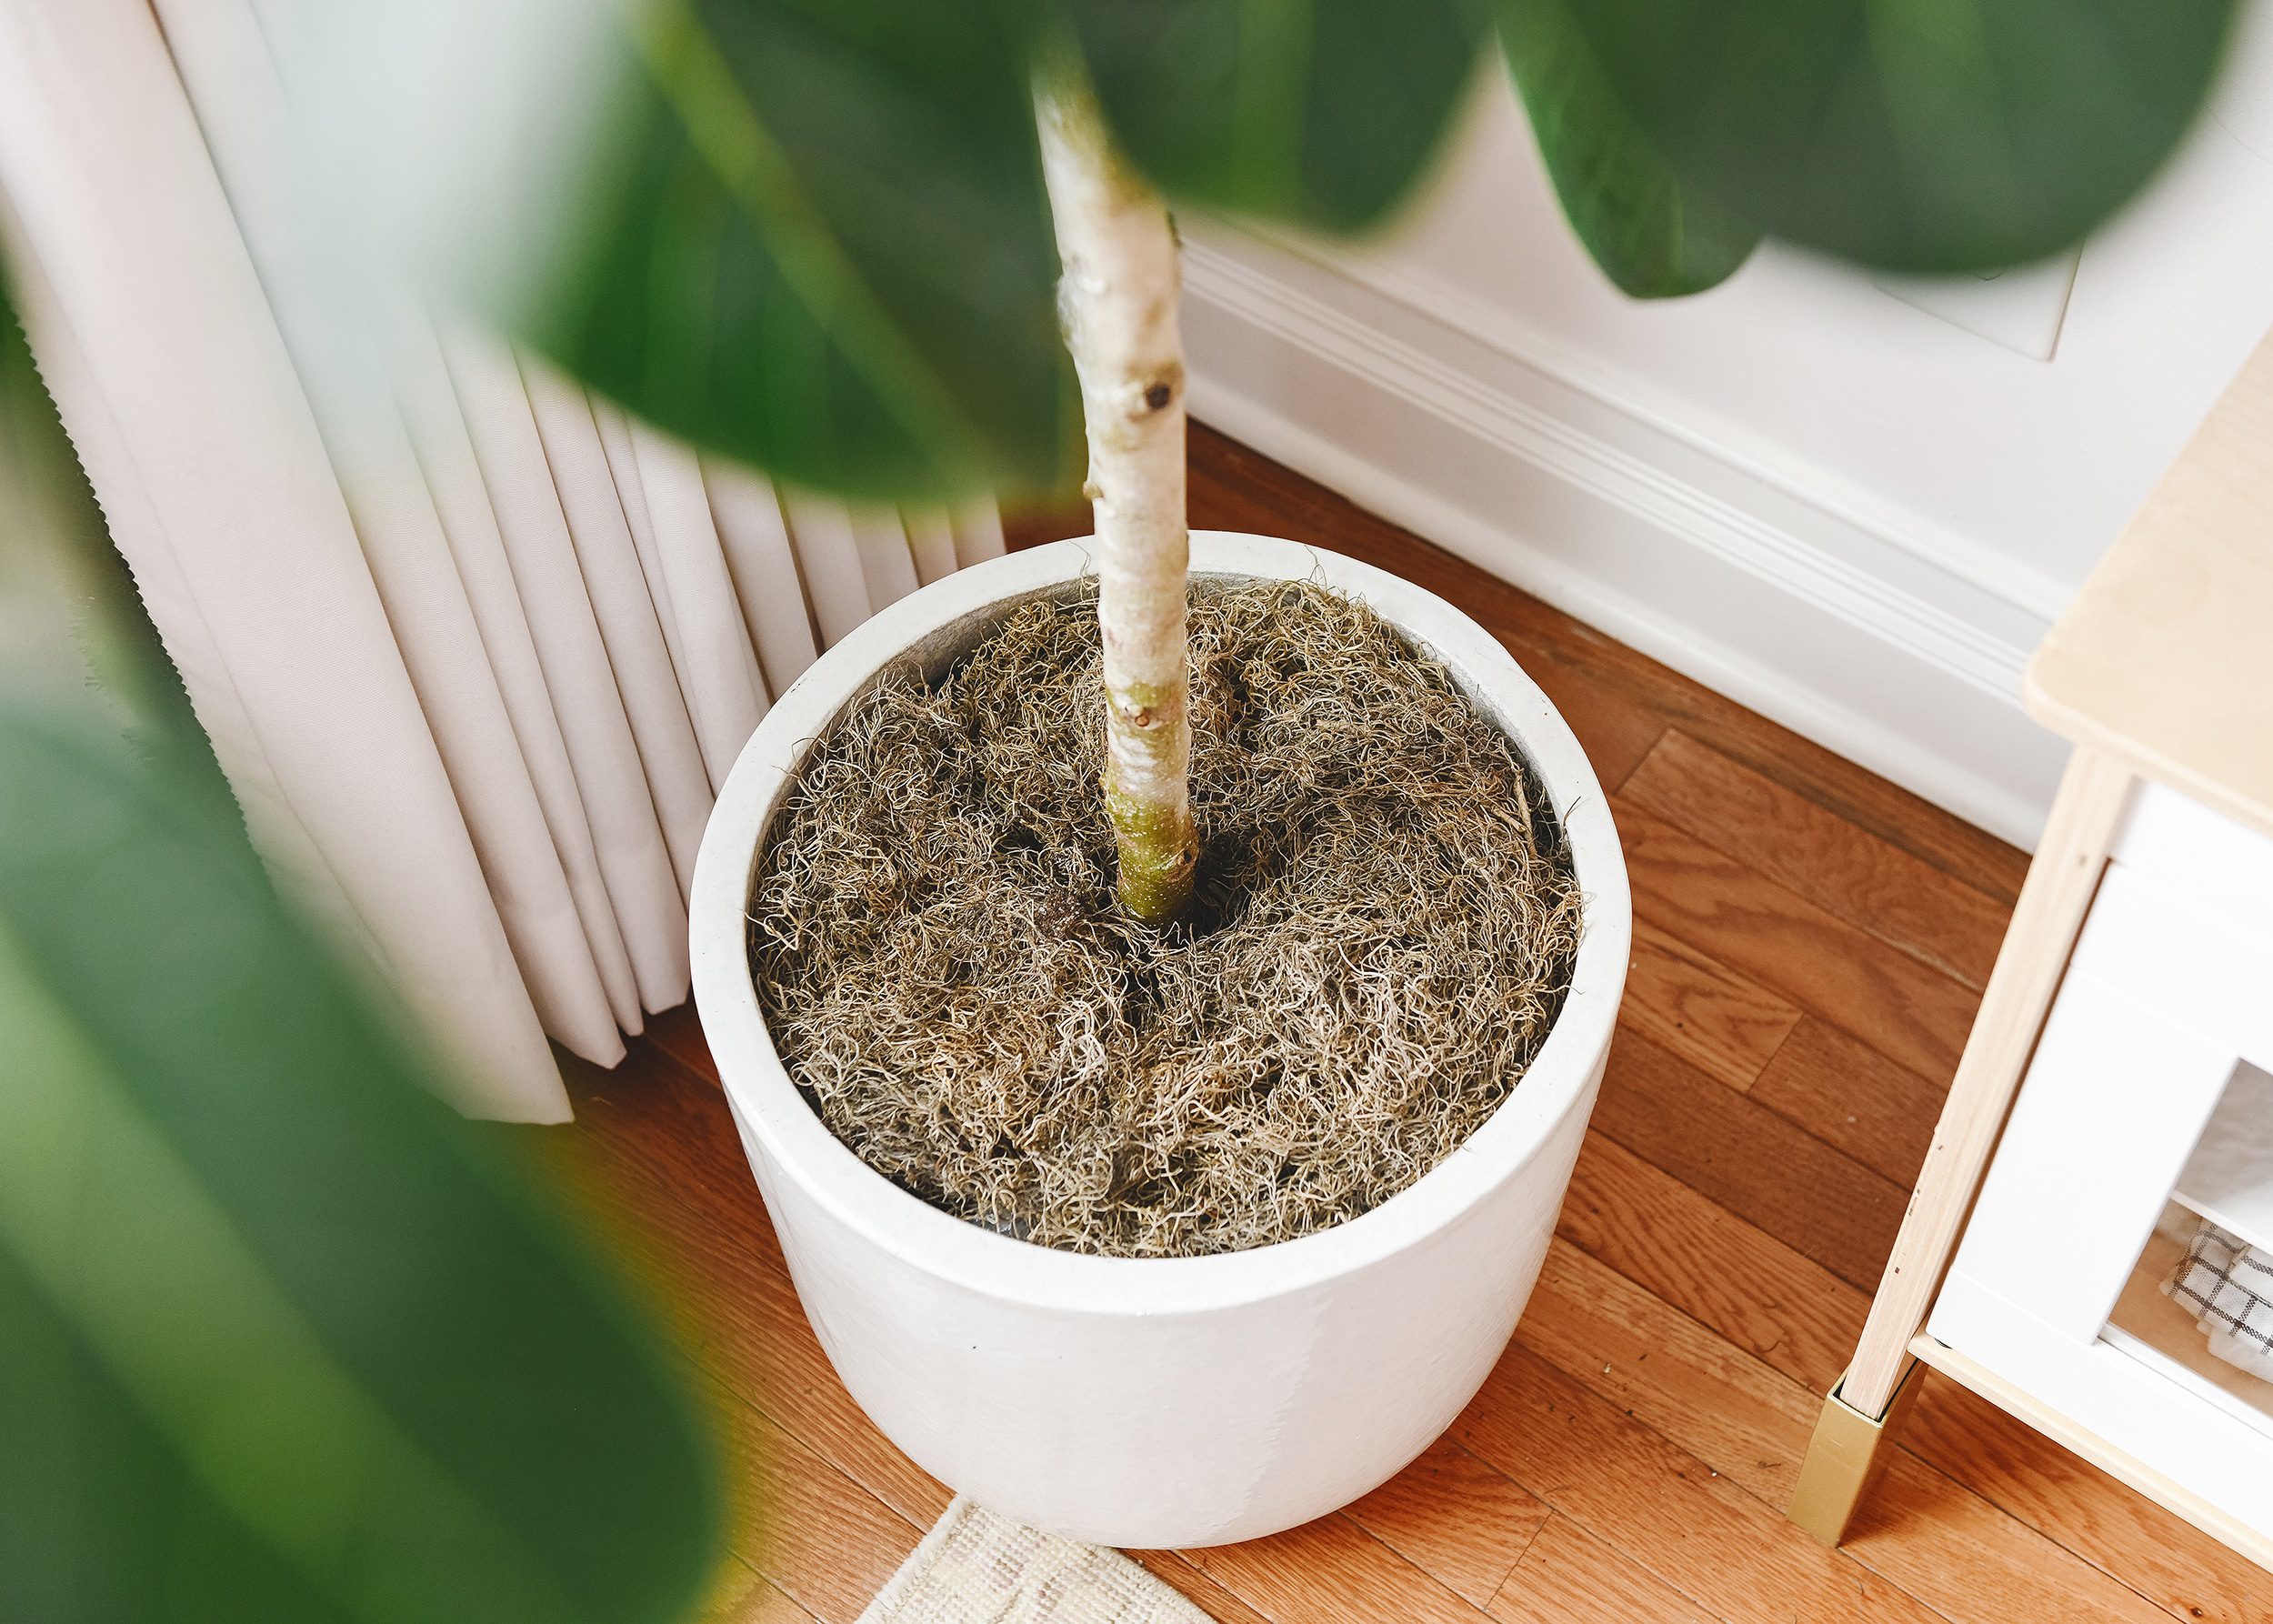 How We Care for Our Ficus Audrey - Yellow Brick Home